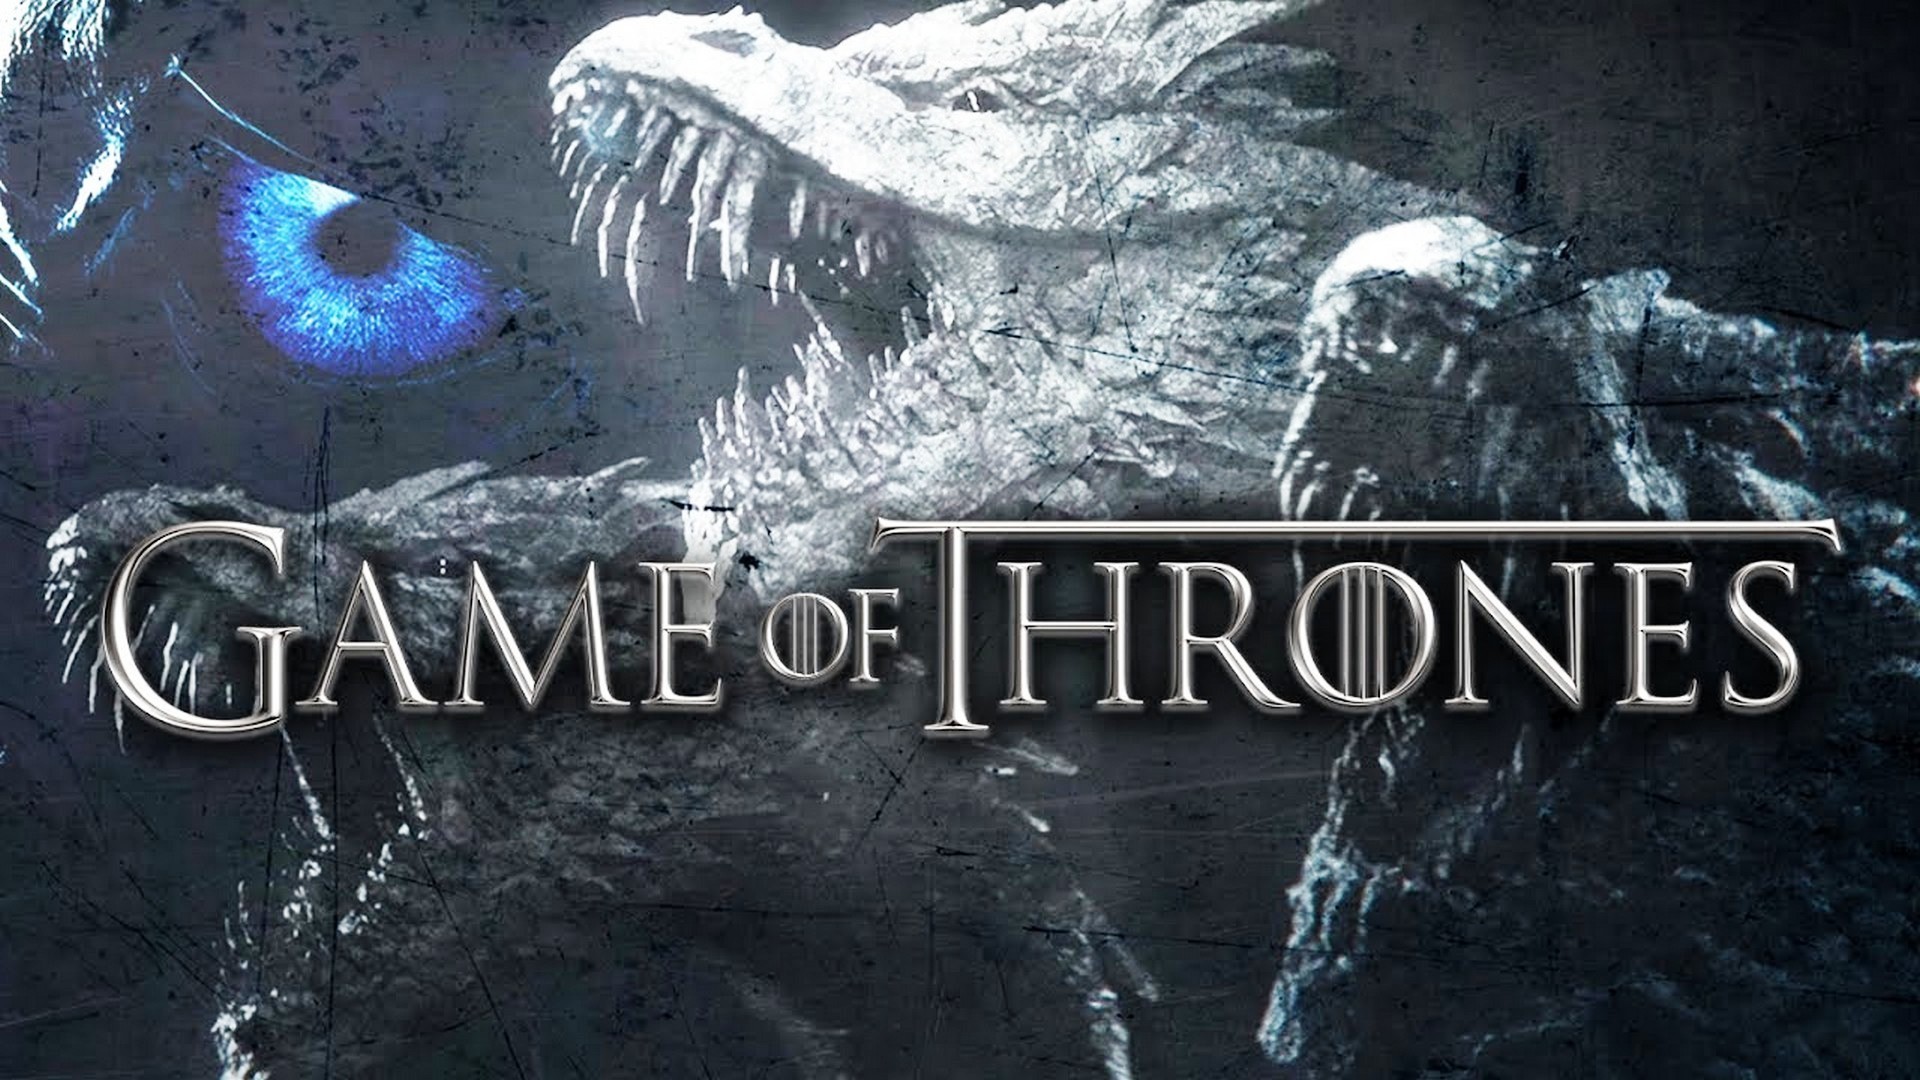 Game of Thrones Poster HD Wallpaper with high-resolution 1920x1080 pixel. You can use this poster wallpaper for your Desktop Computers, Mac Screensavers, Windows Backgrounds, iPhone Wallpapers, Tablet or Android Lock screen and another Mobile device